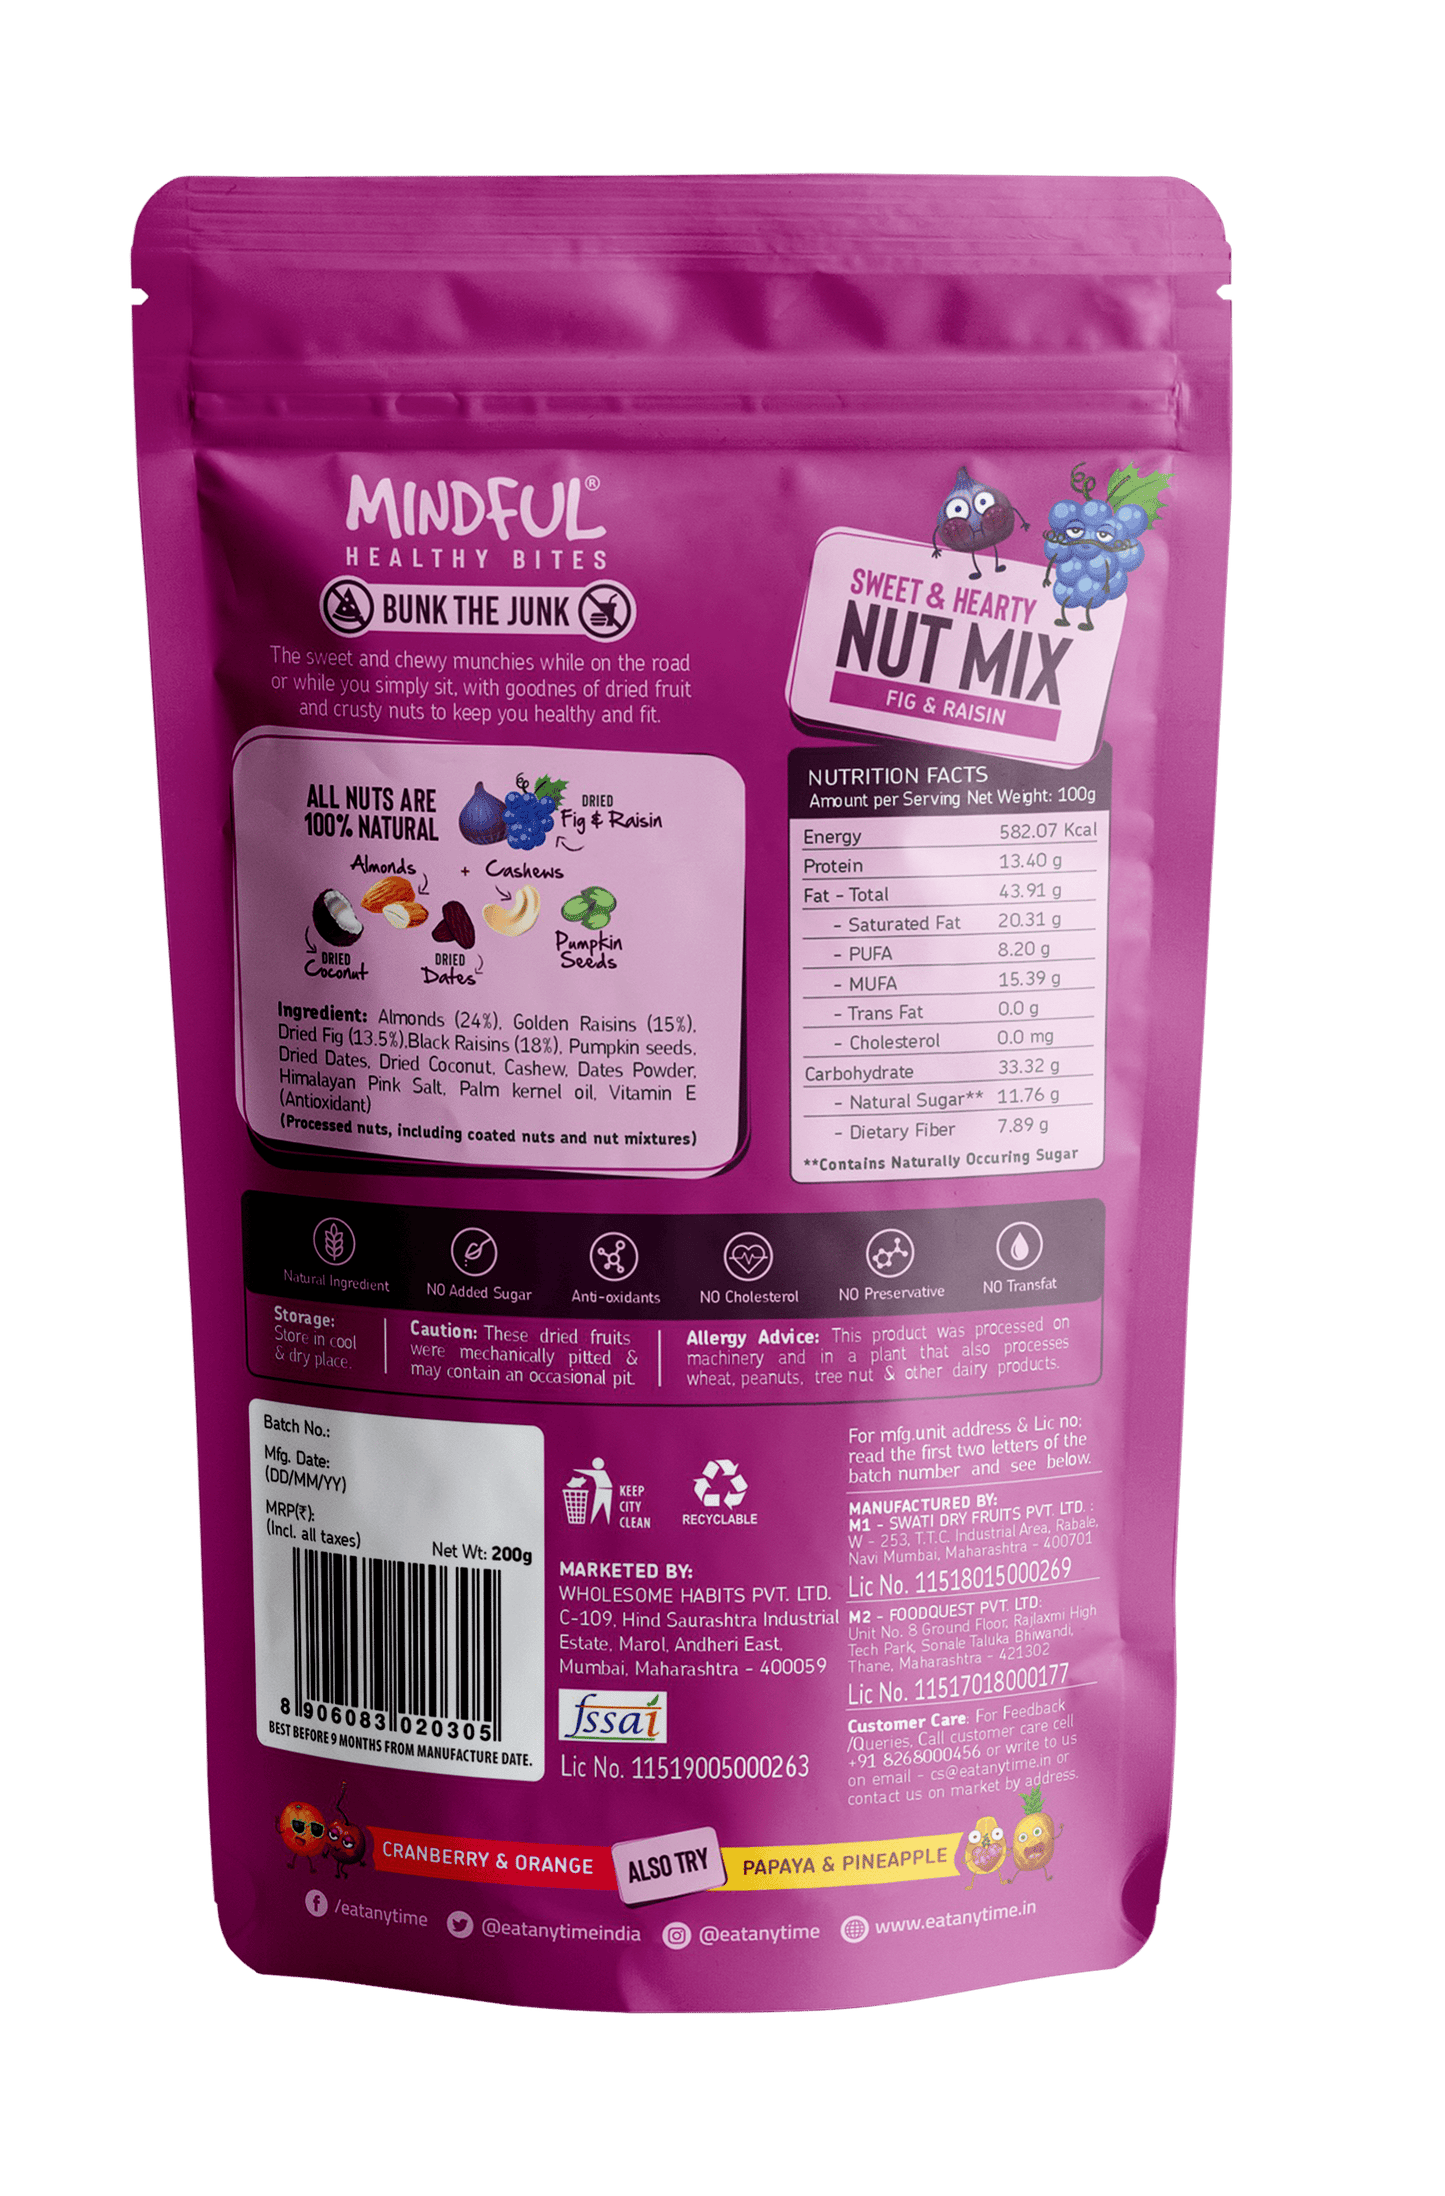 Buy Trailmix Pouch at Best Price - Eat Anytime